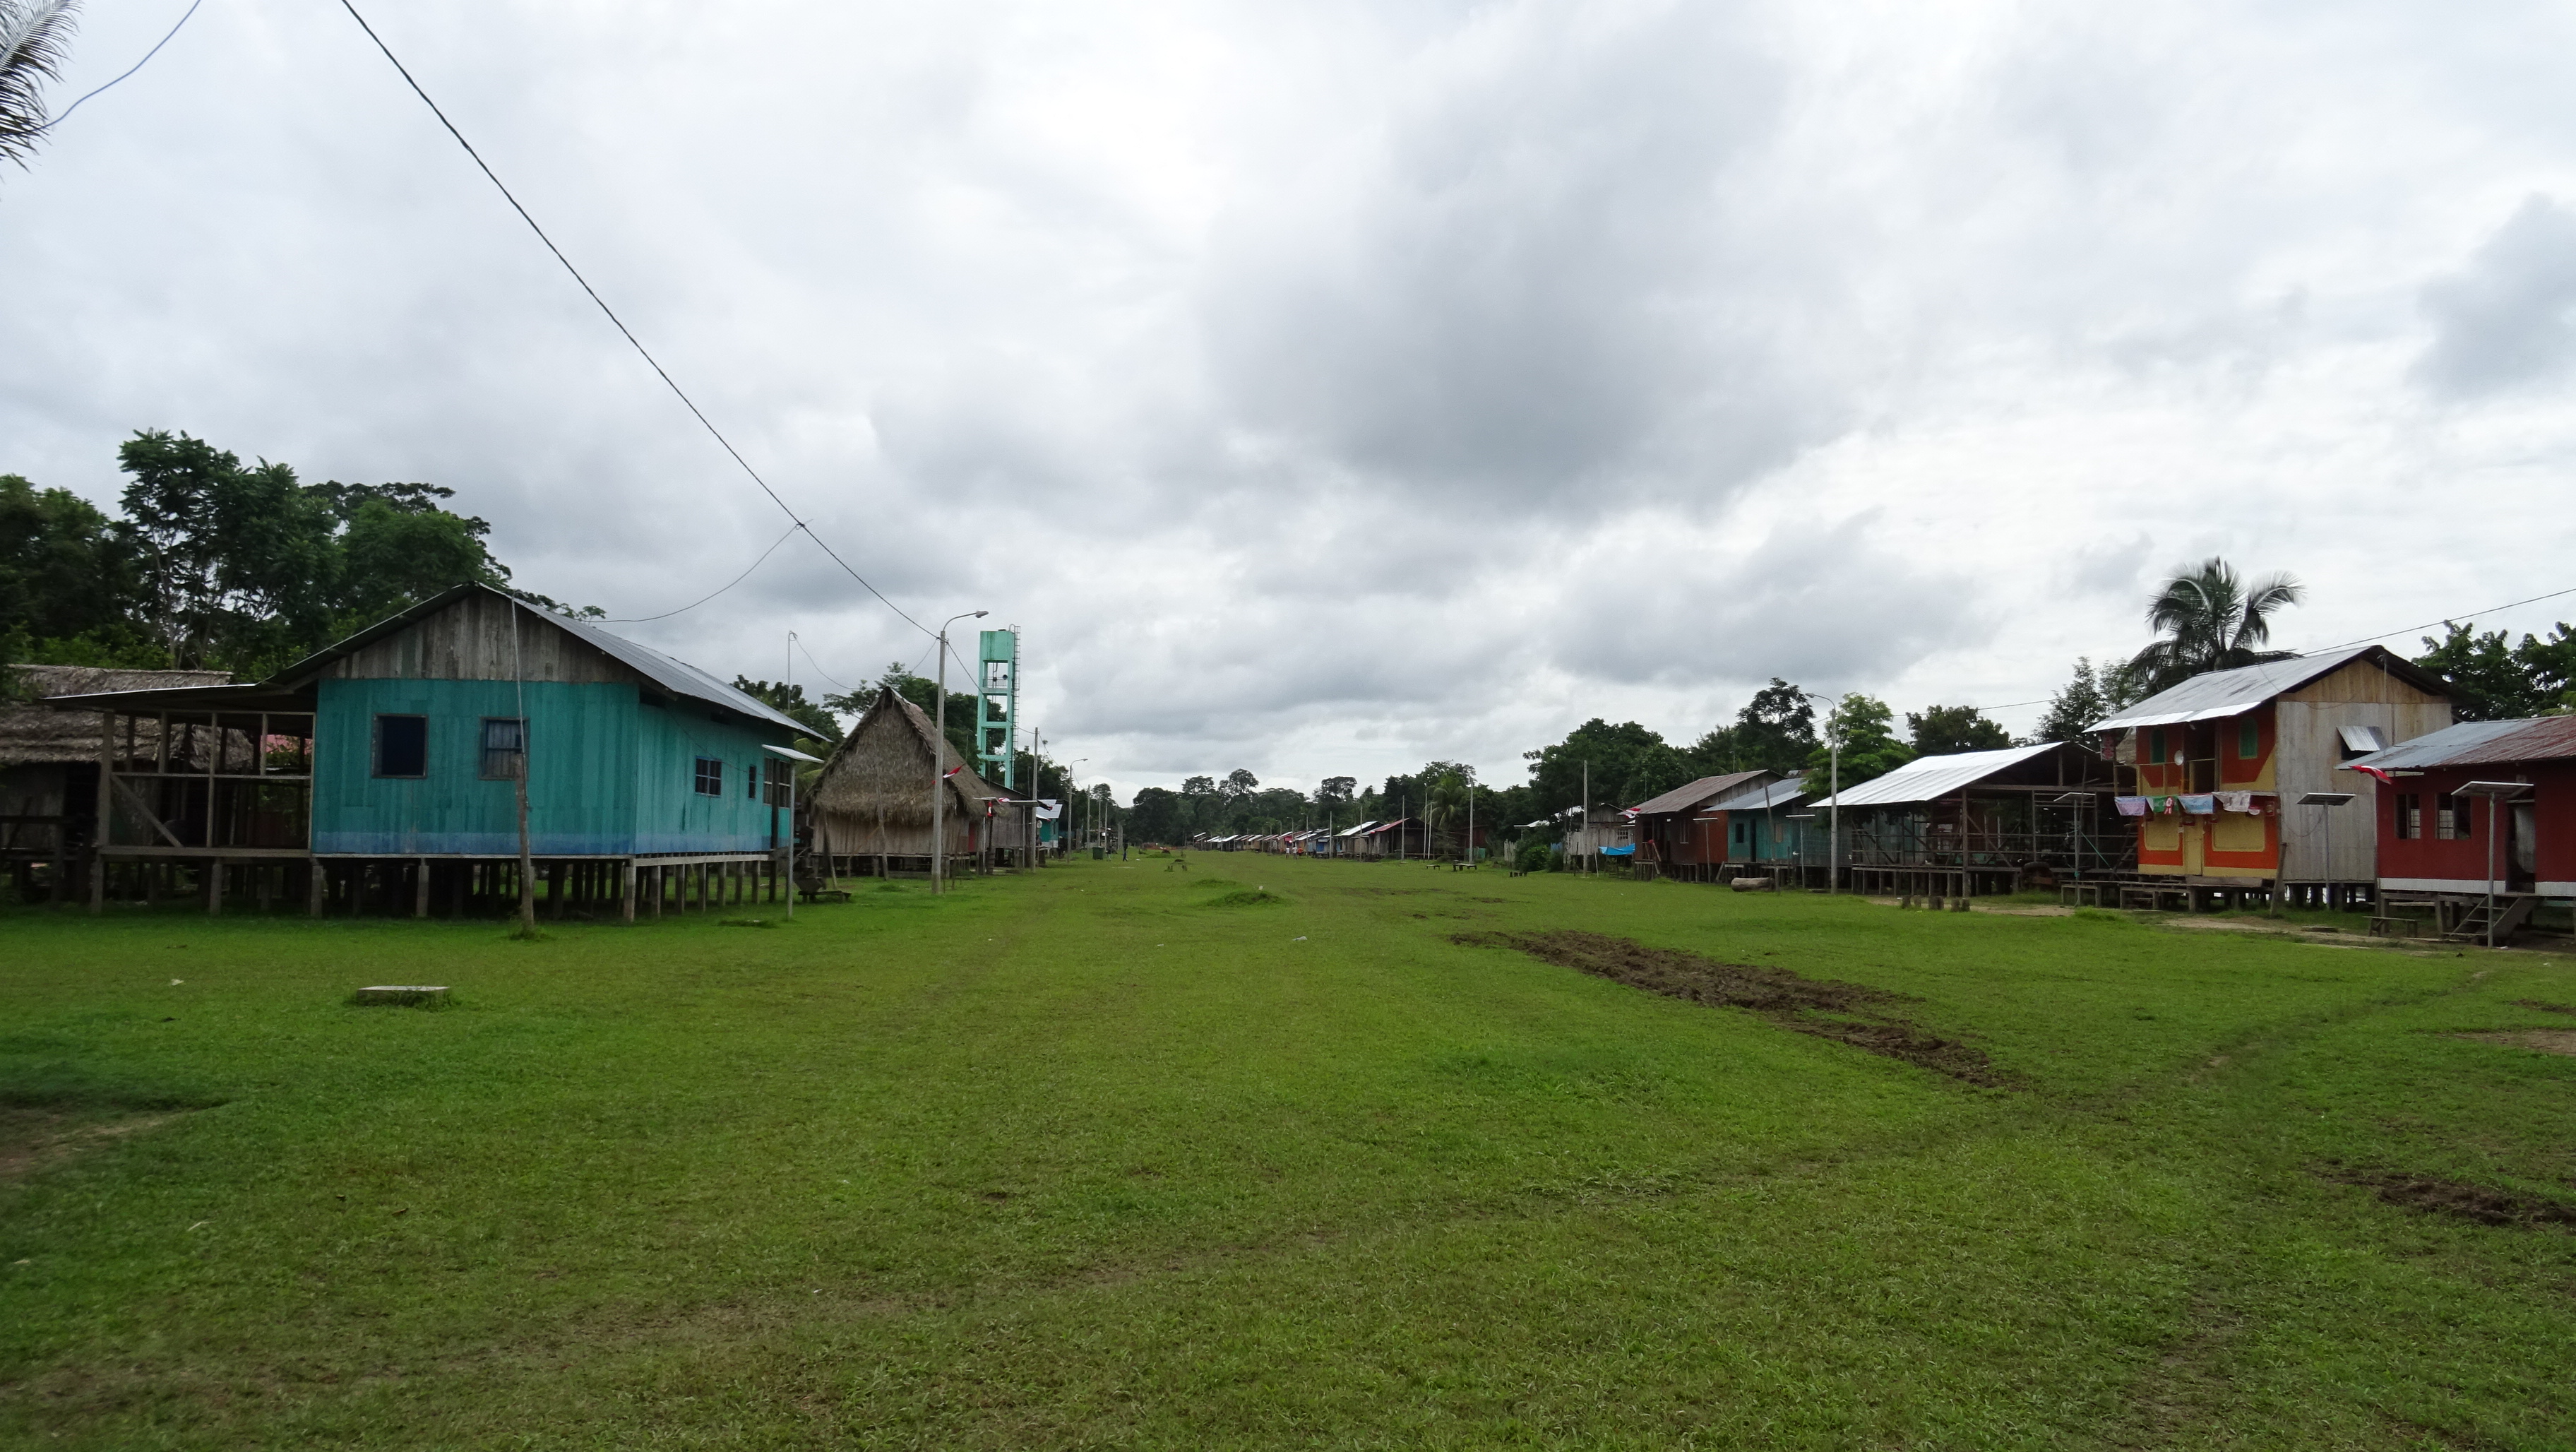 Indigenous community in the Amazon, buildings on either side of green grass, cloudy sky